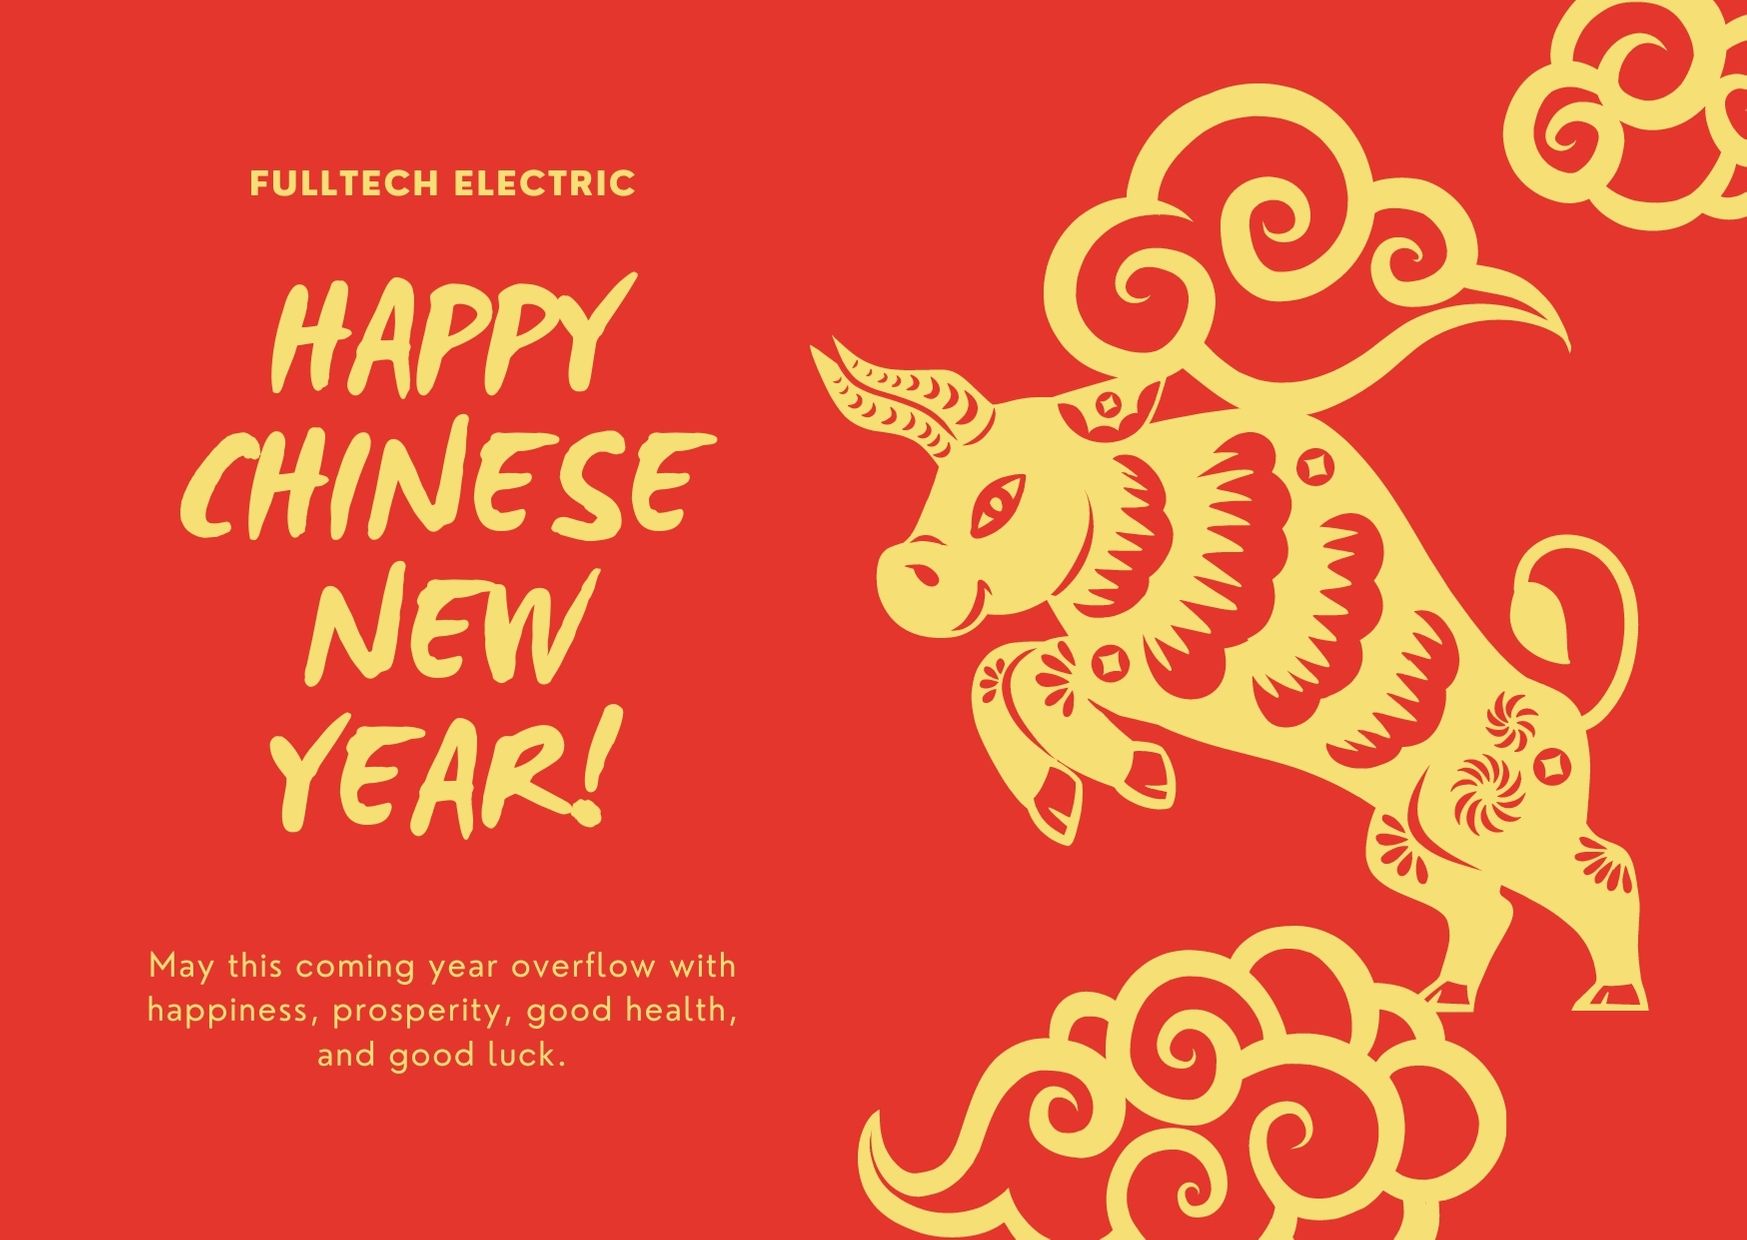 Chinese New Year Holidays (Feb. 10th - Feb. 16th, 2021) - Fulltech Electric